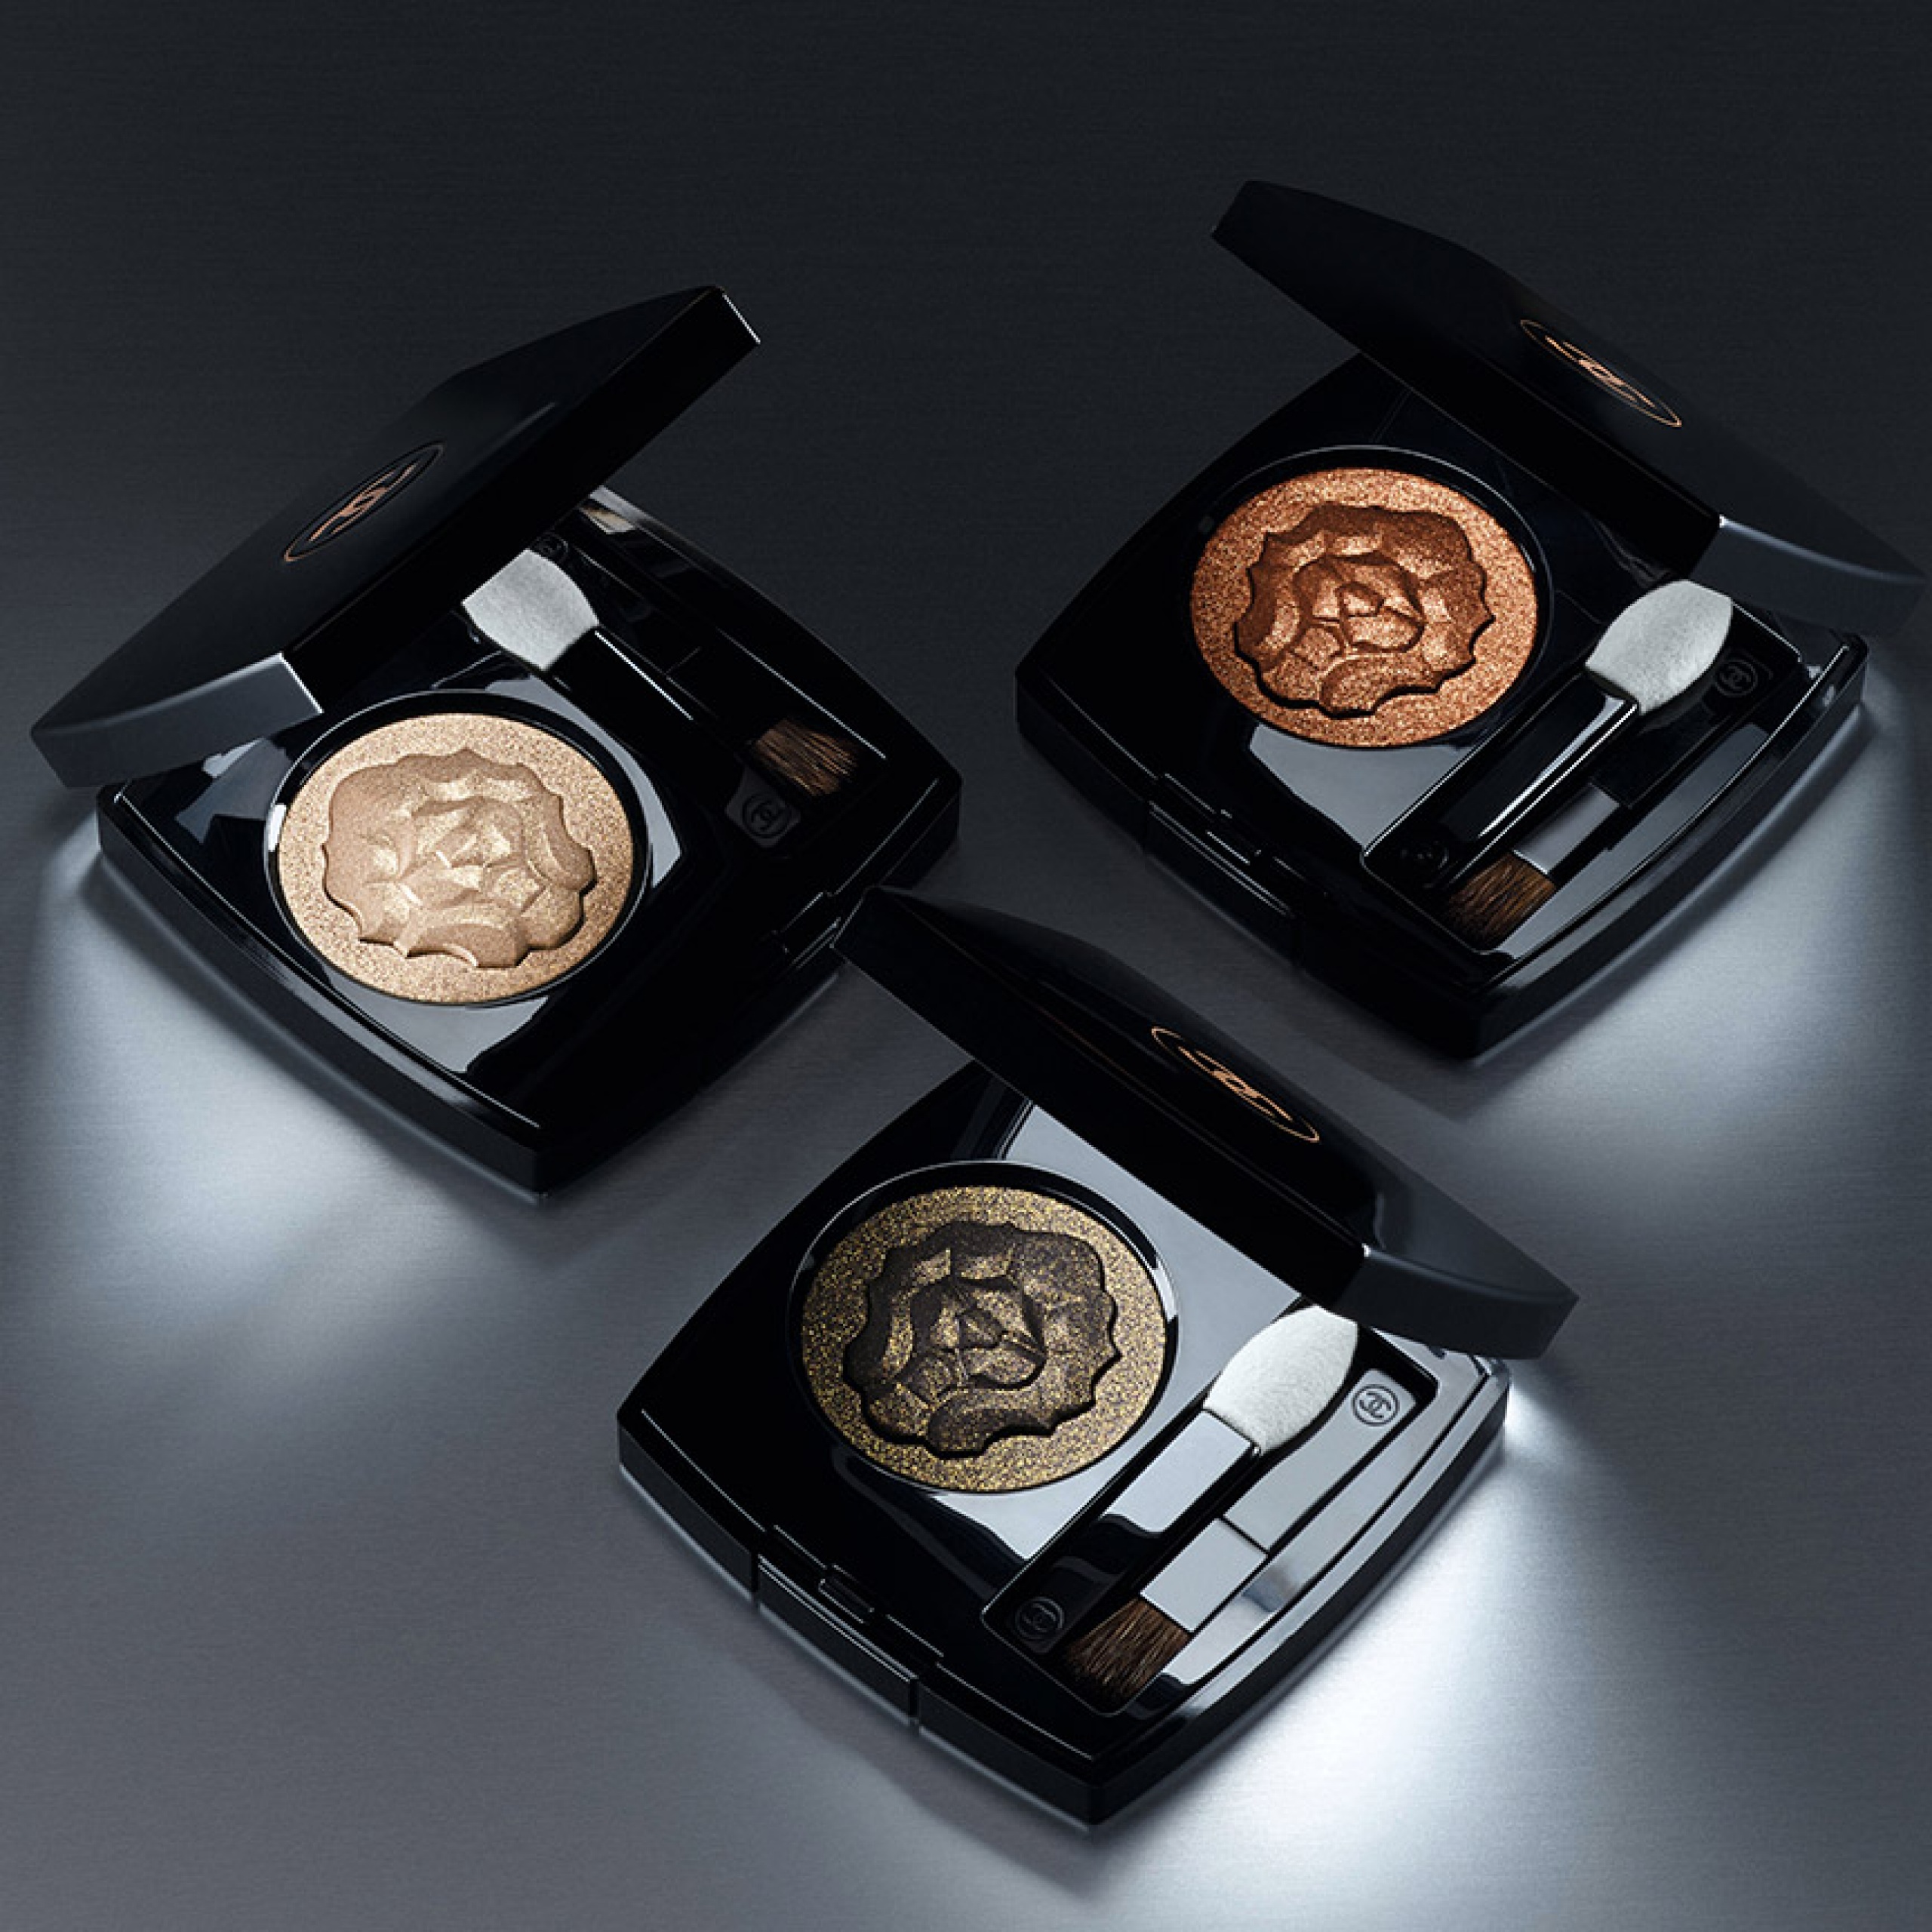 Chanel's Make Up Holiday Collection